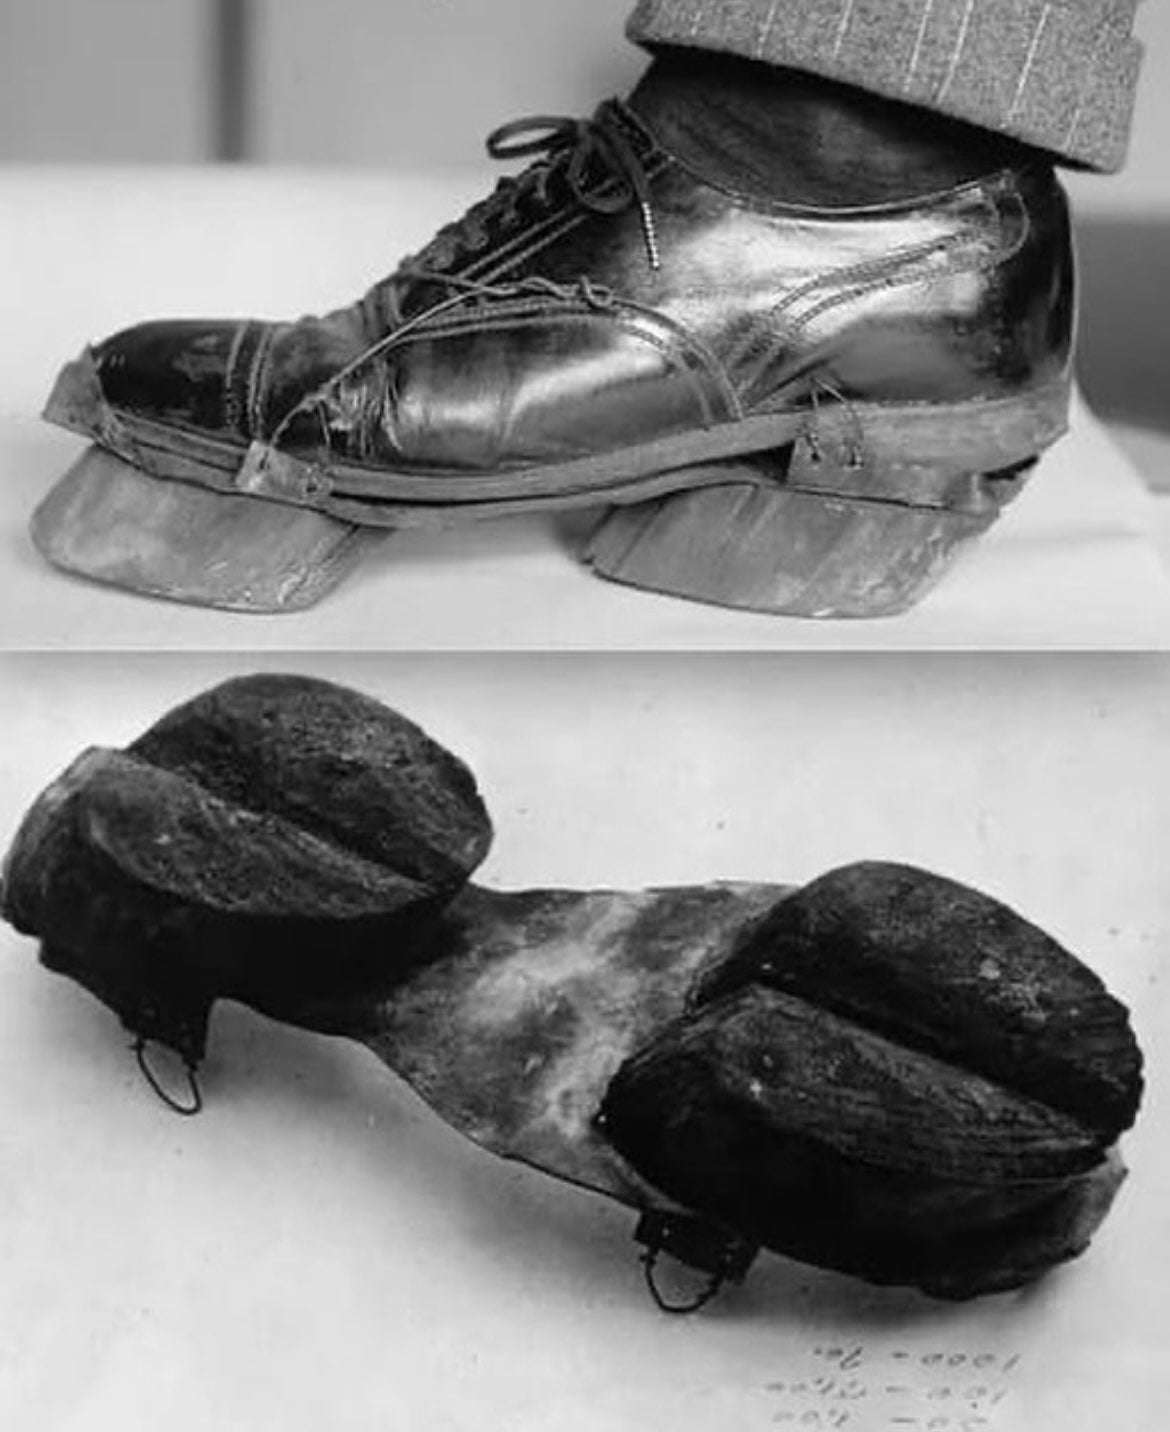 image showing Cow shoes used by Moonshiners in the Prohibition days (1919-1933) to disguise their tootprints.